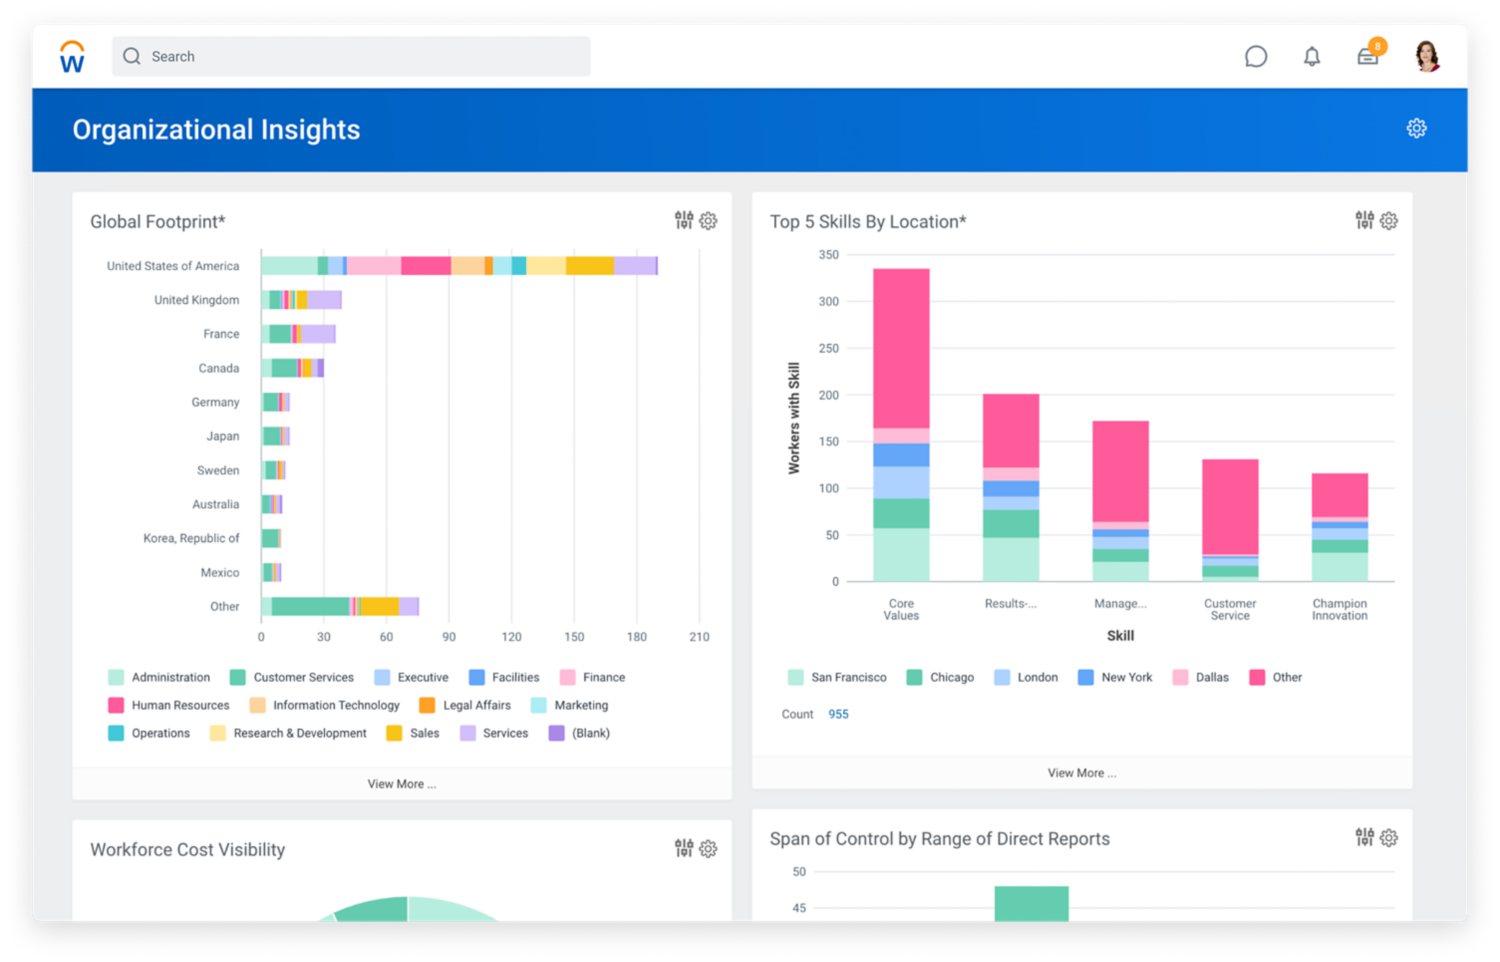 Organizational insights dashboard showing bar graphs for global footprint and top five skills by location. 2020R1